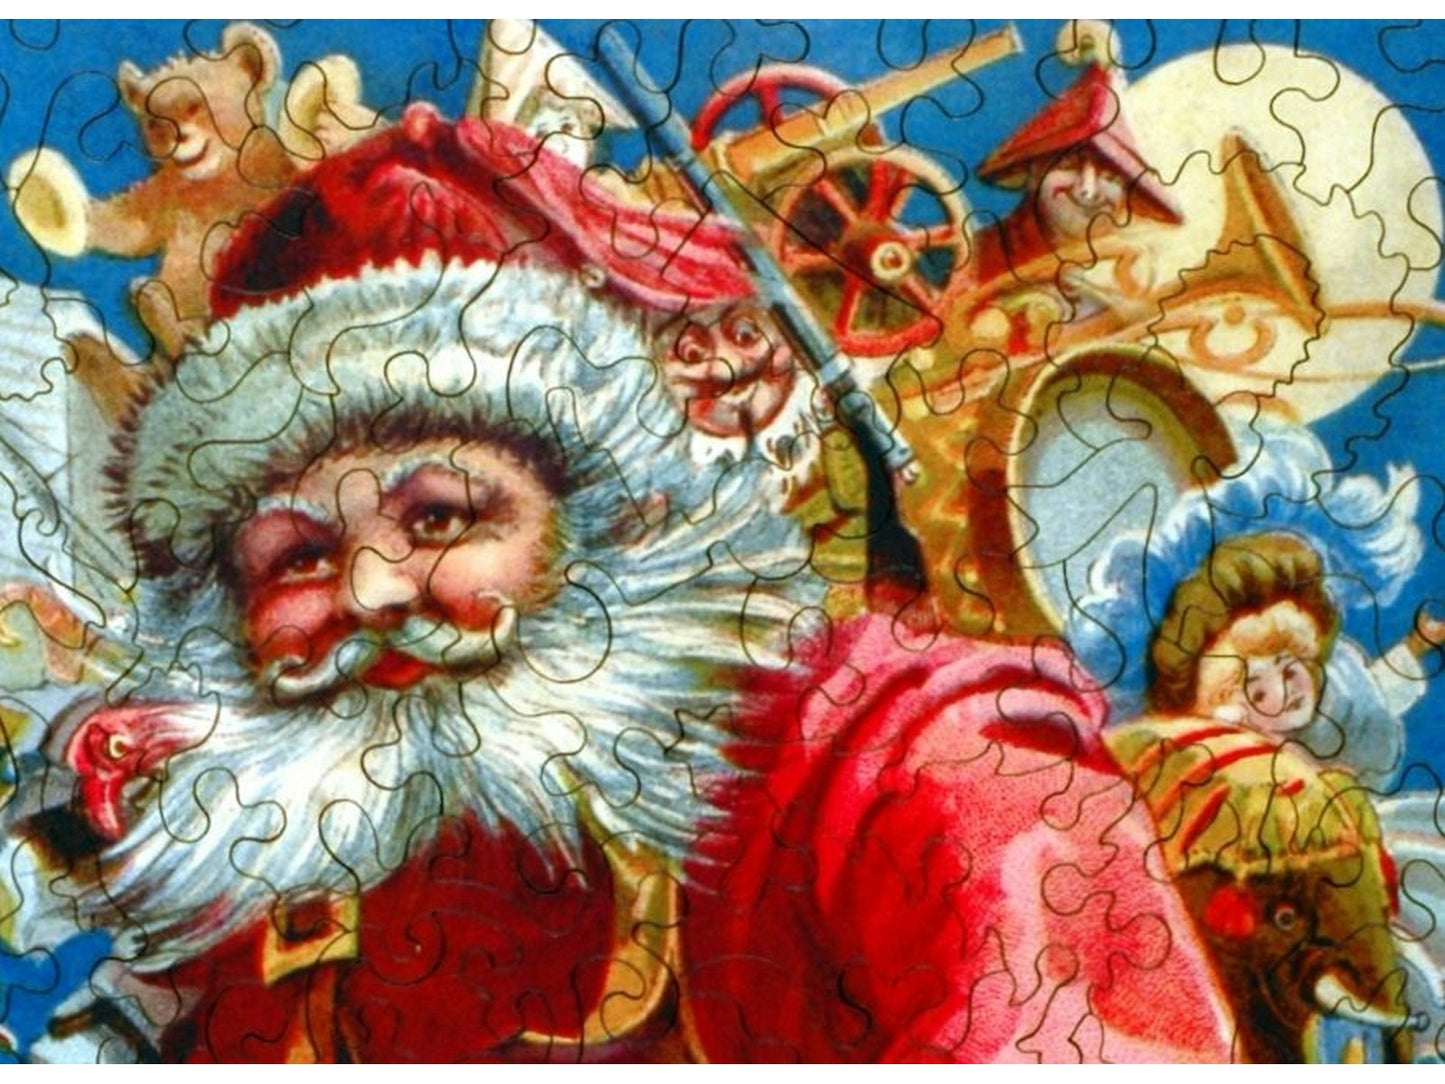 A closeup of the front of the puzzle, Chimney Santa.